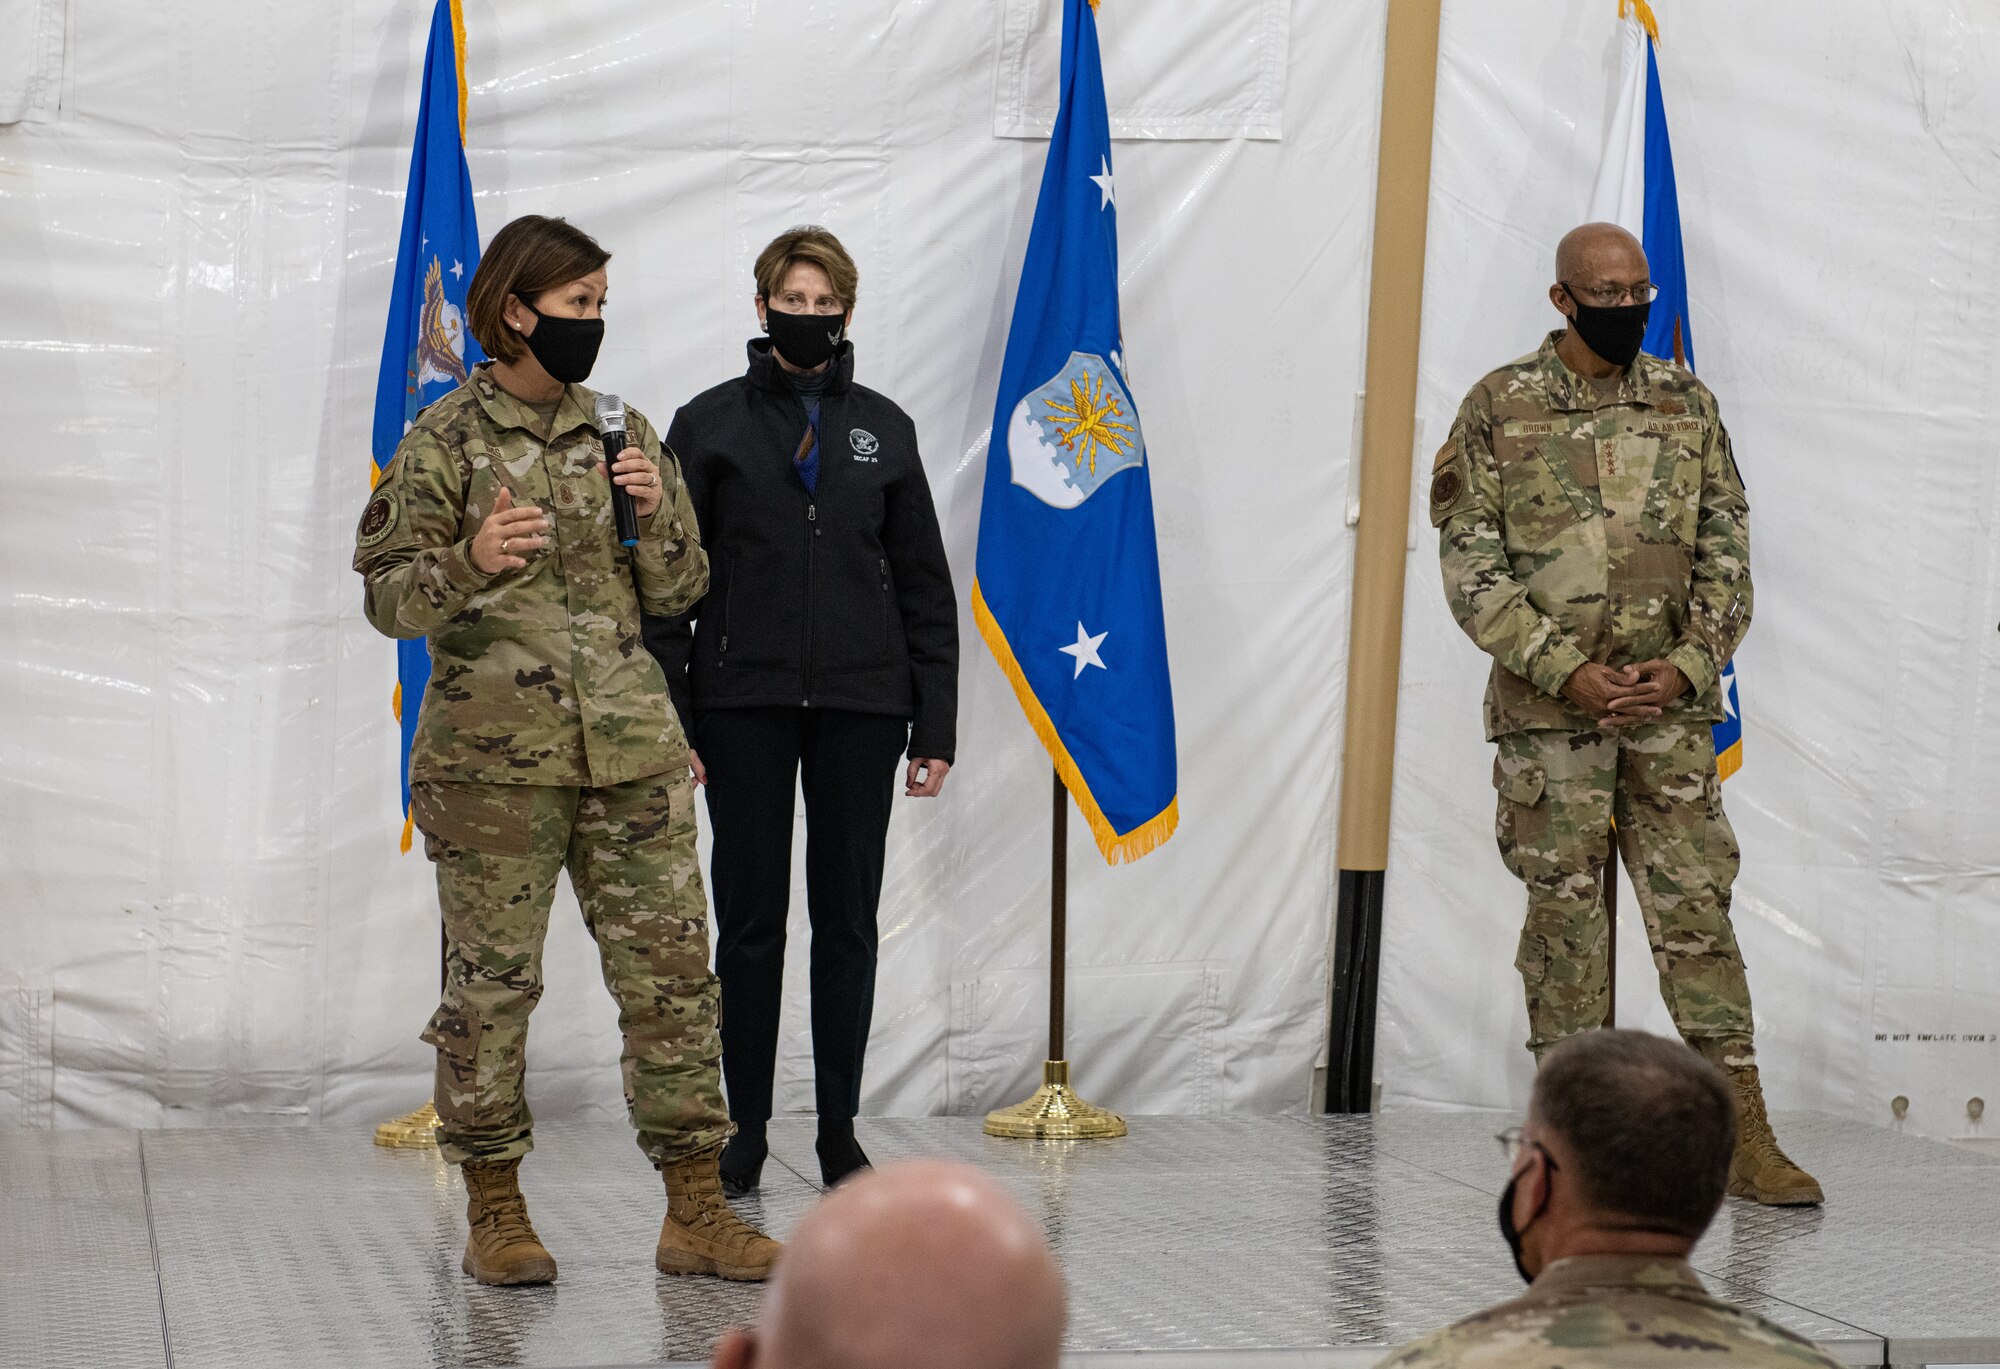 Secretary of the Air Force Barbara Barrett, Air Force Chief of Staff Gen. Charles Q. Brown, Jr., and Chief Master Sergeant of the Air Force JoAnne S. Bass, visited Airmen at Prince Sultan Air Base, Kingdom of Saudi Arabia Dec. 22, 2020.